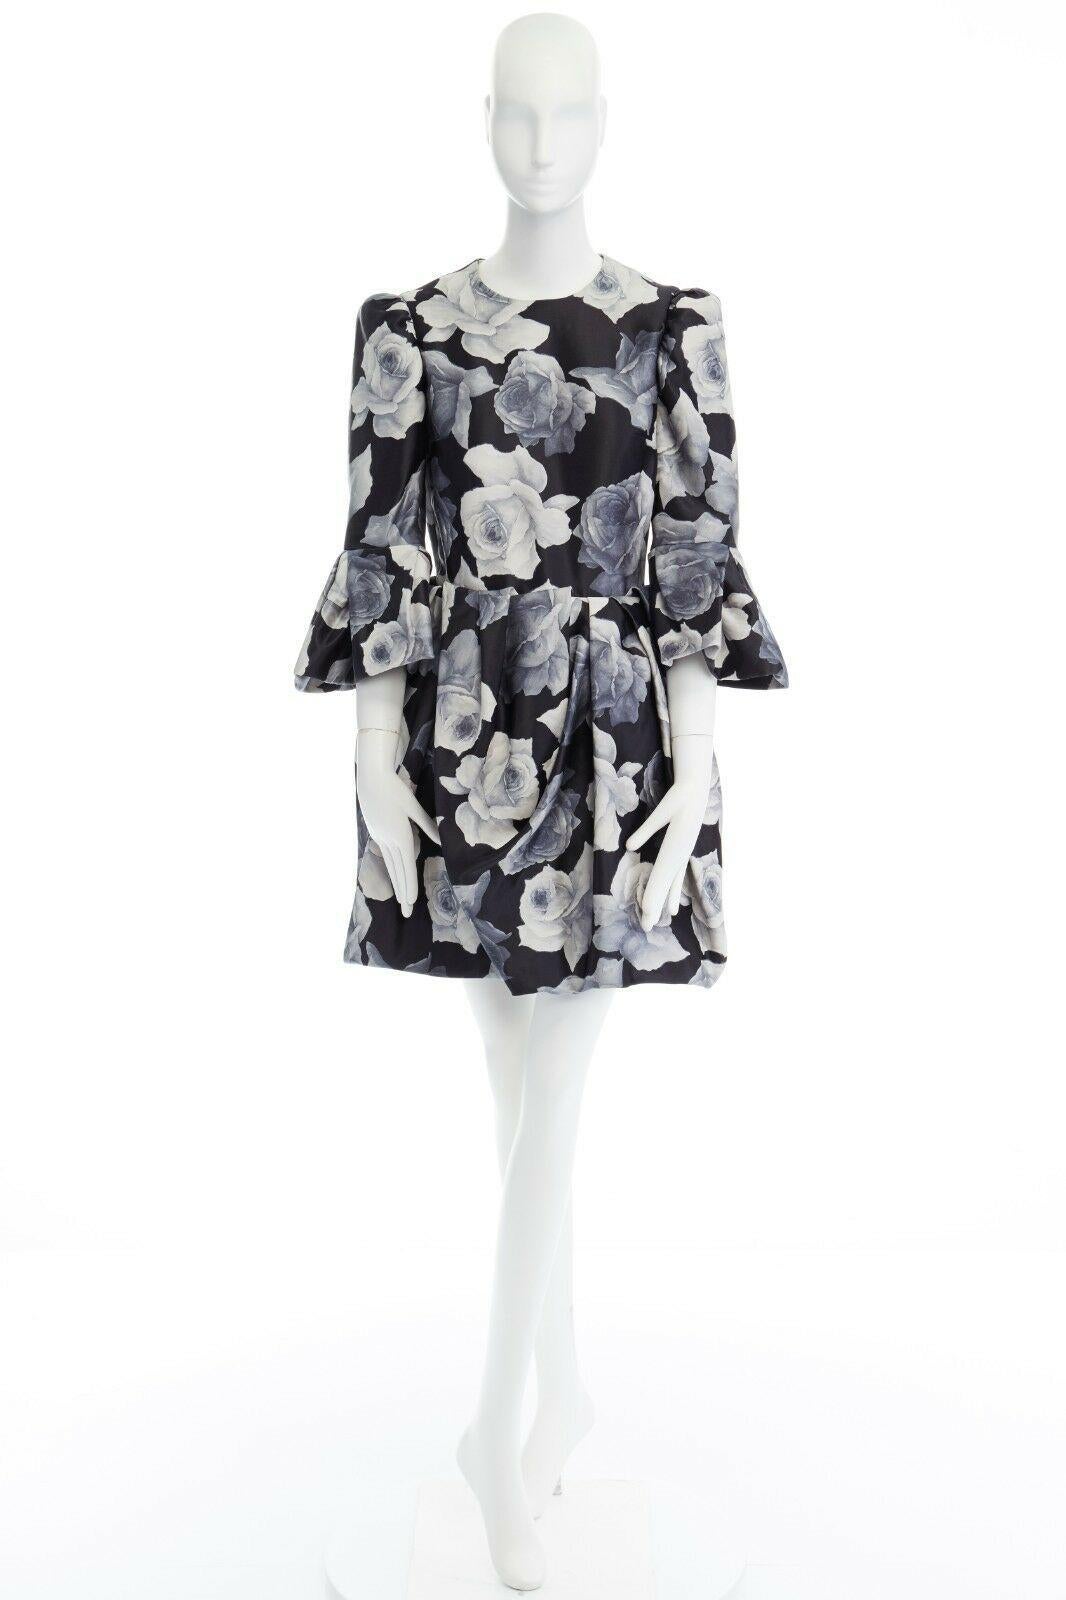 runway LANVIN AW11 black rose print puff shoulder ruffle cuff cocktail dress XS

LANVIN BY ALBER ELBAZ
FROM THE FALL WINTER 2011 COLLECTION
Cotton, silk. Black base with floral rose print in grey, Round neck. 
Puff padded shoulder. 3/4 sleeves.